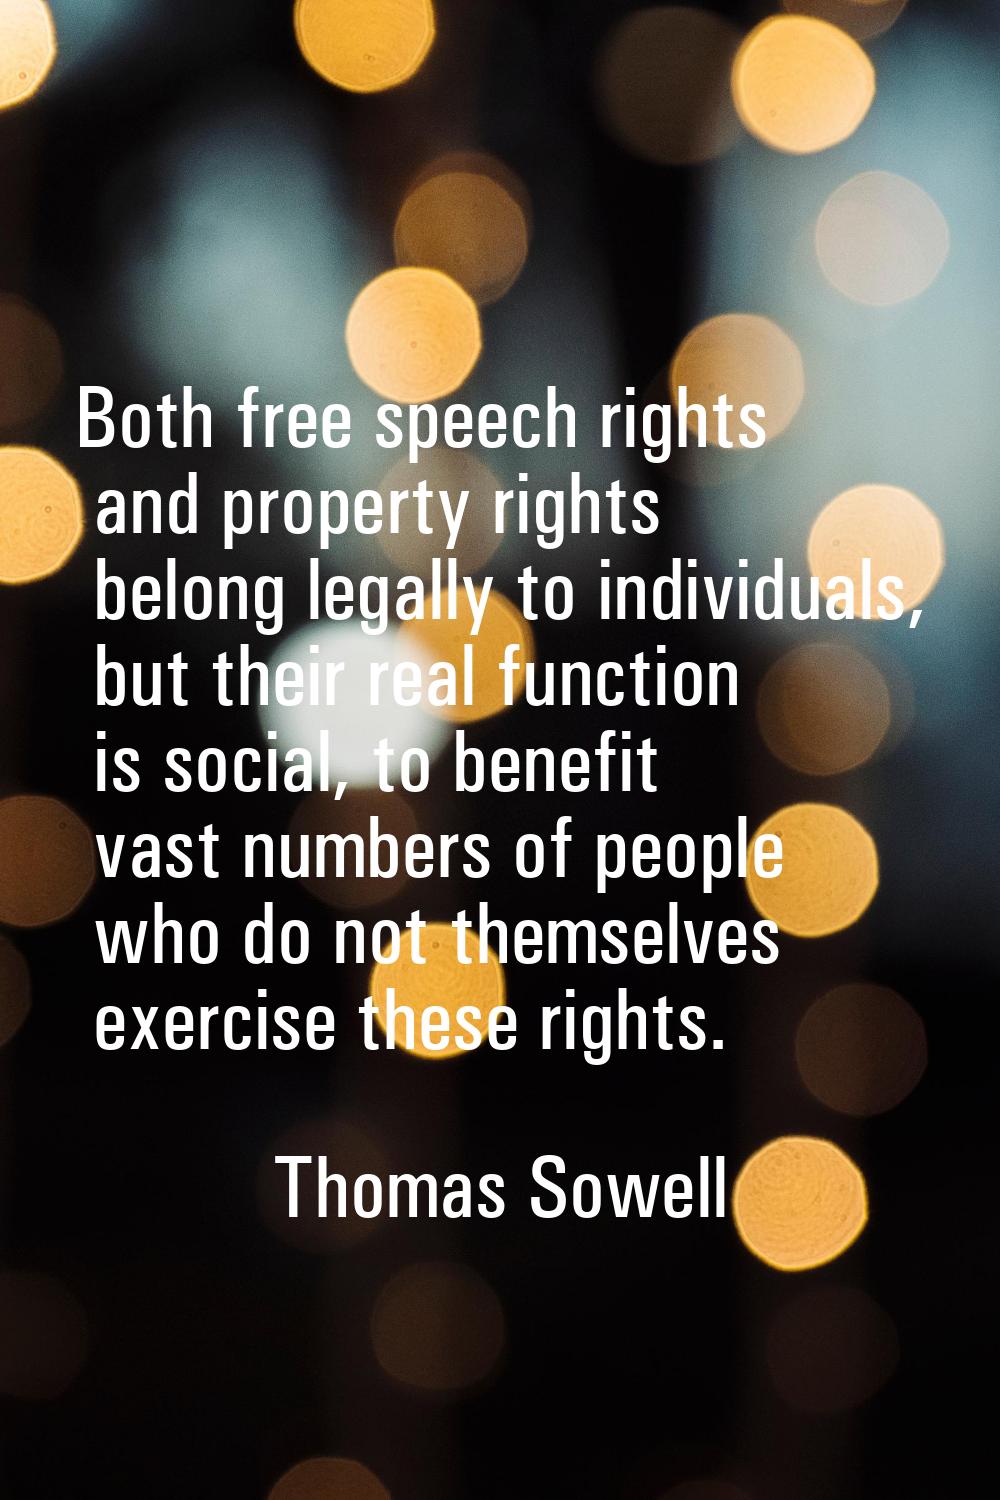 Both free speech rights and property rights belong legally to individuals, but their real function 